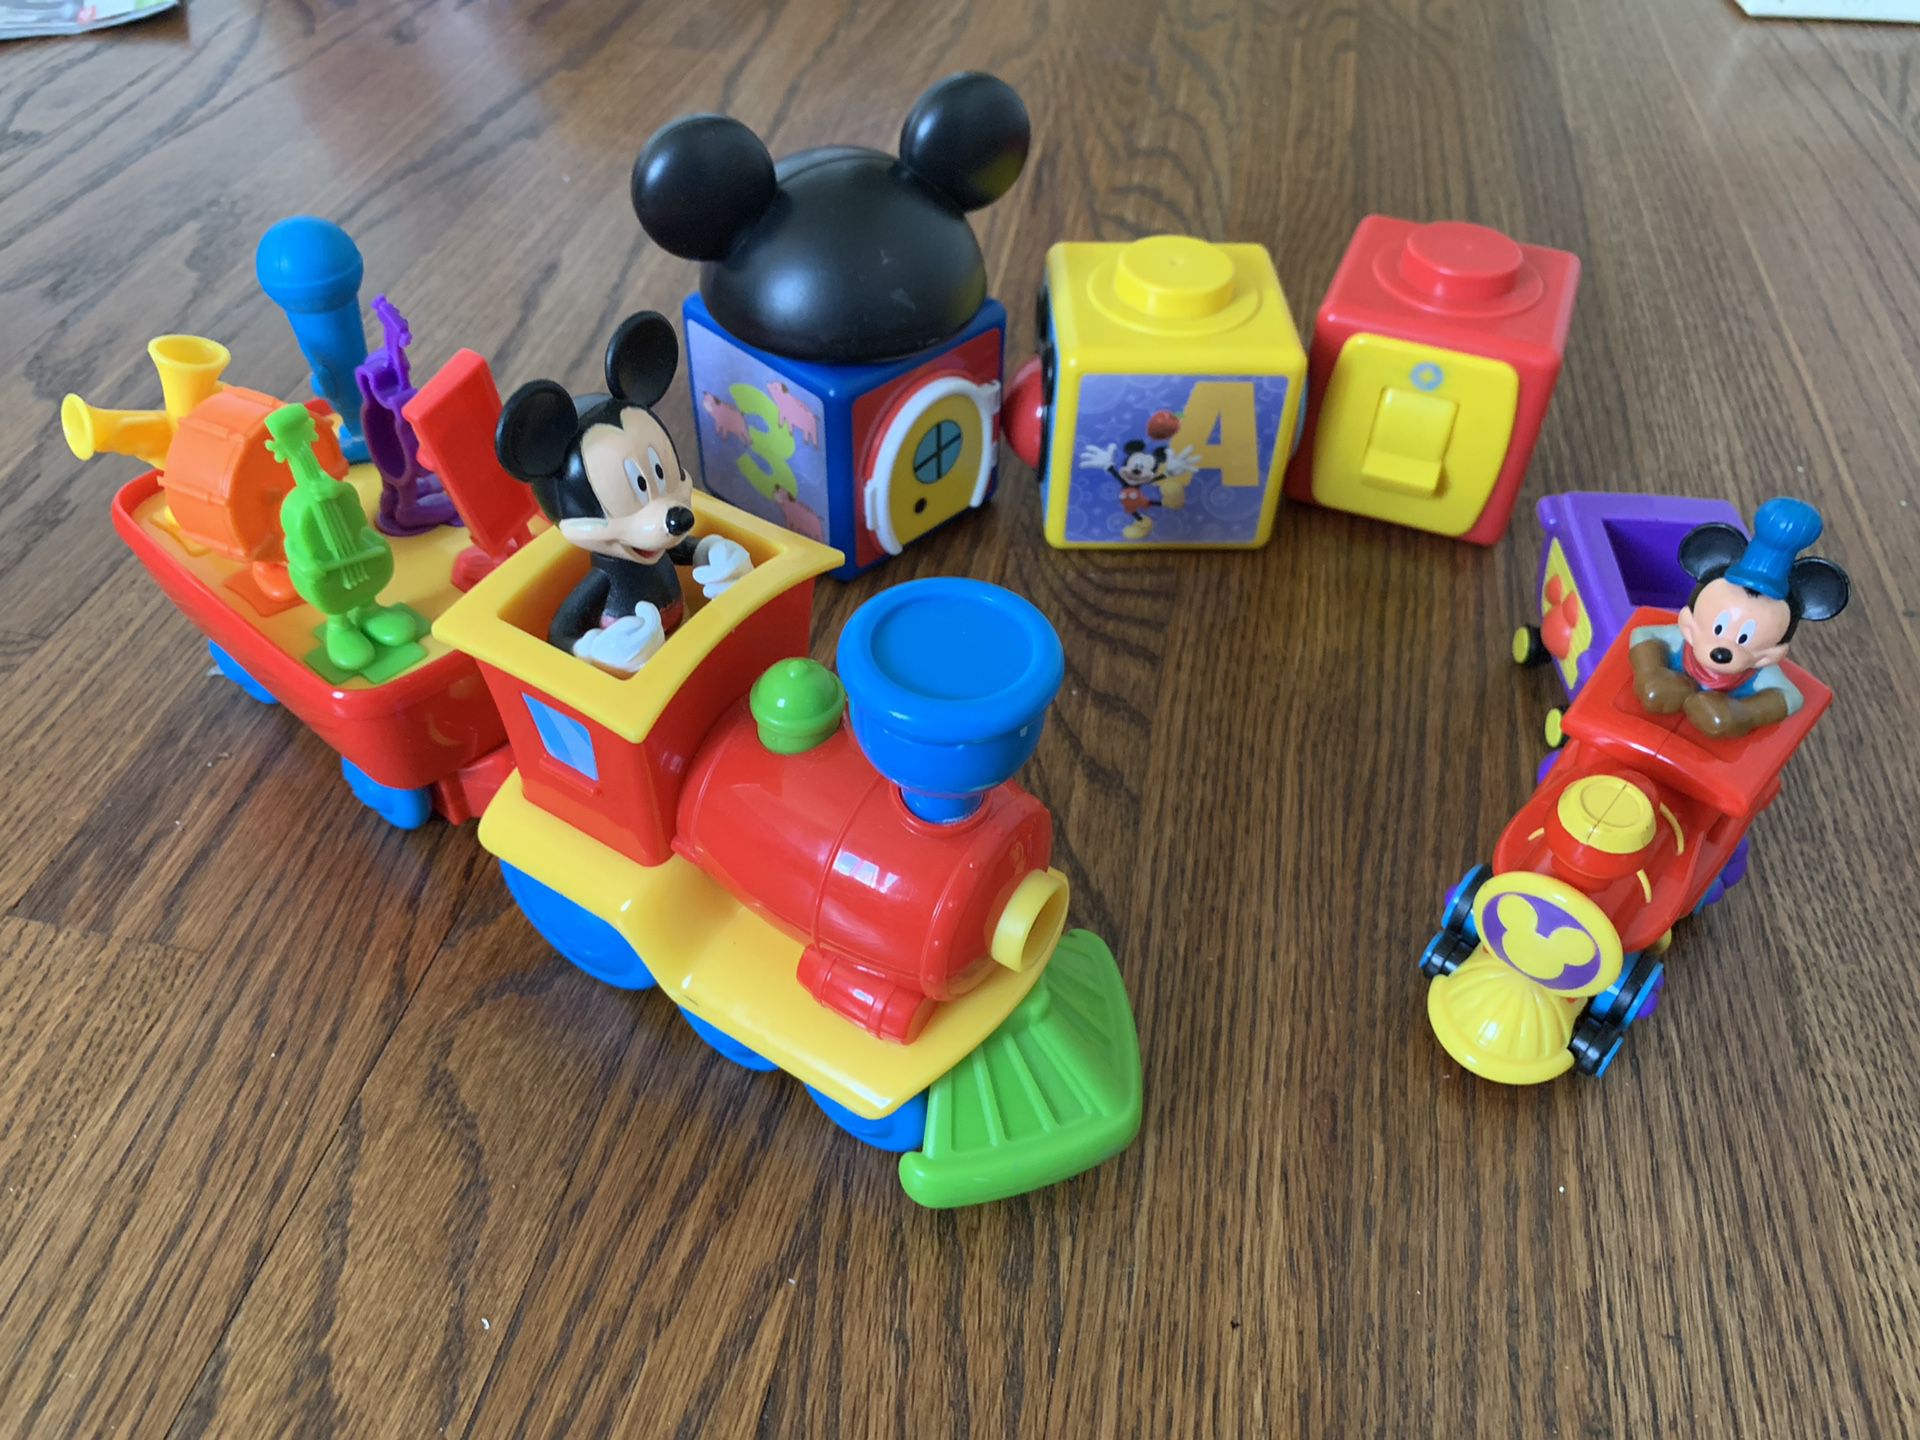 Mickey Mouse clubhouse dvd set for Sale in Bakersfield, CA - OfferUp